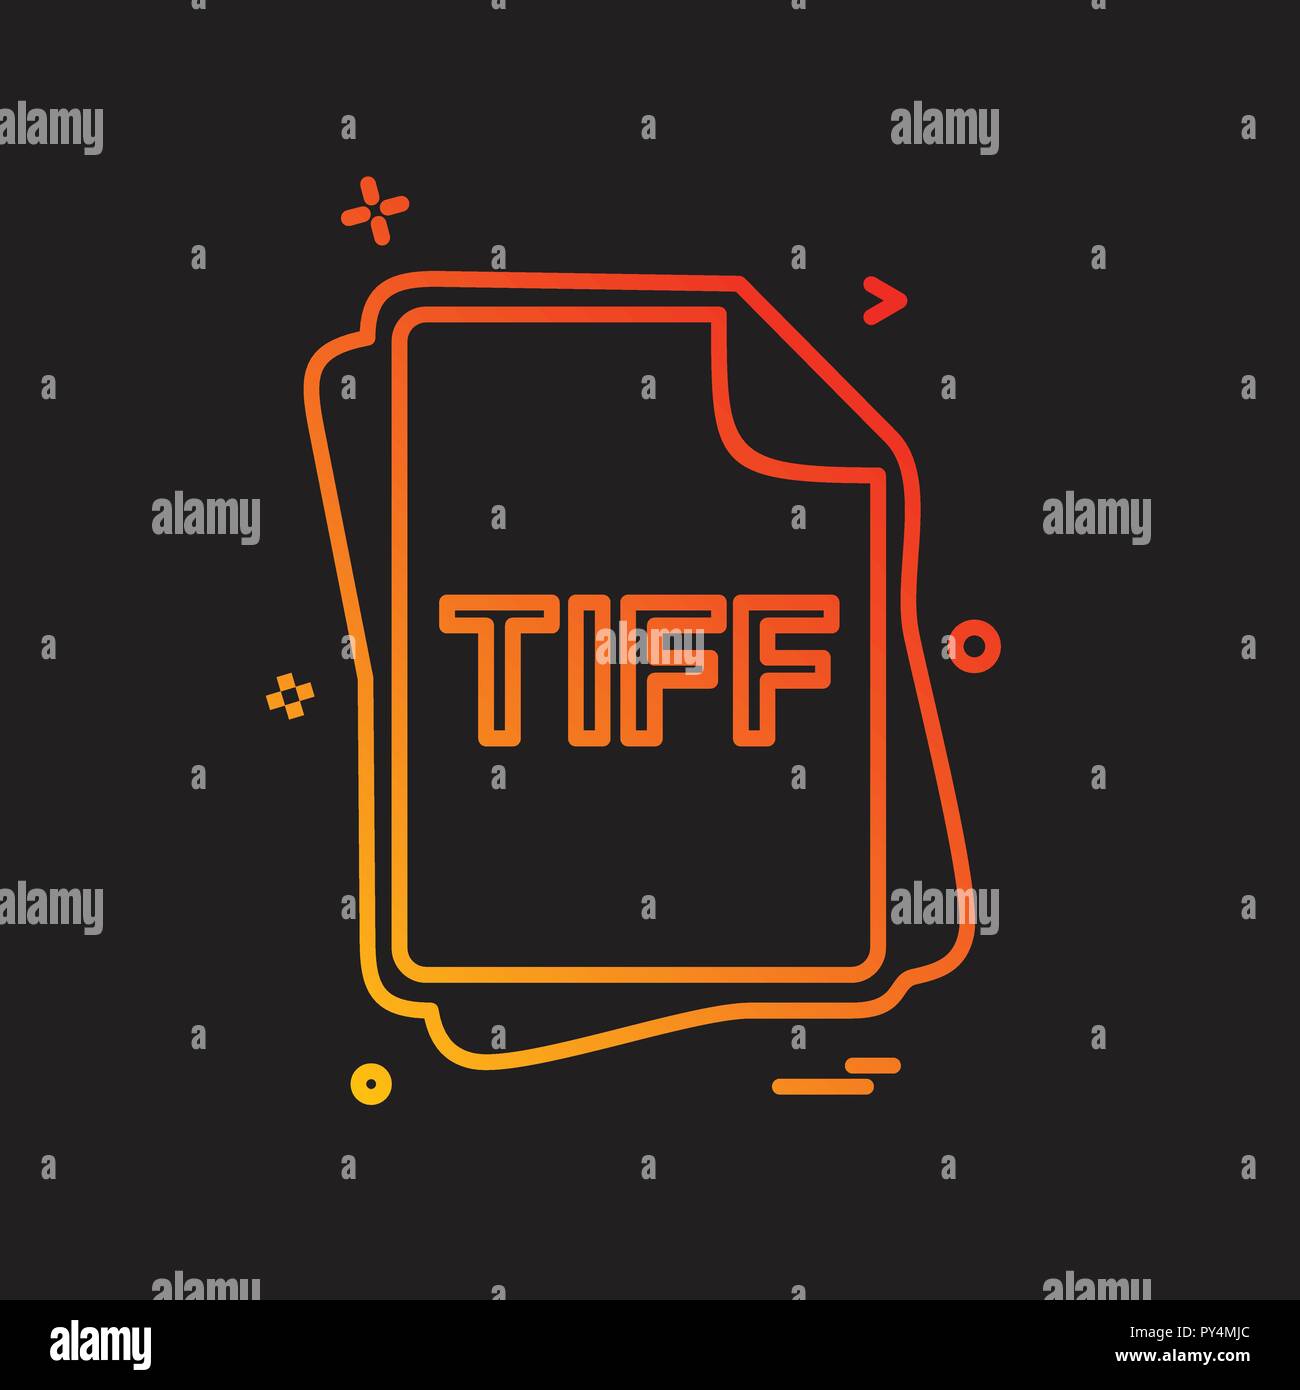 Tiff file type Stock Vector Images - Alamy